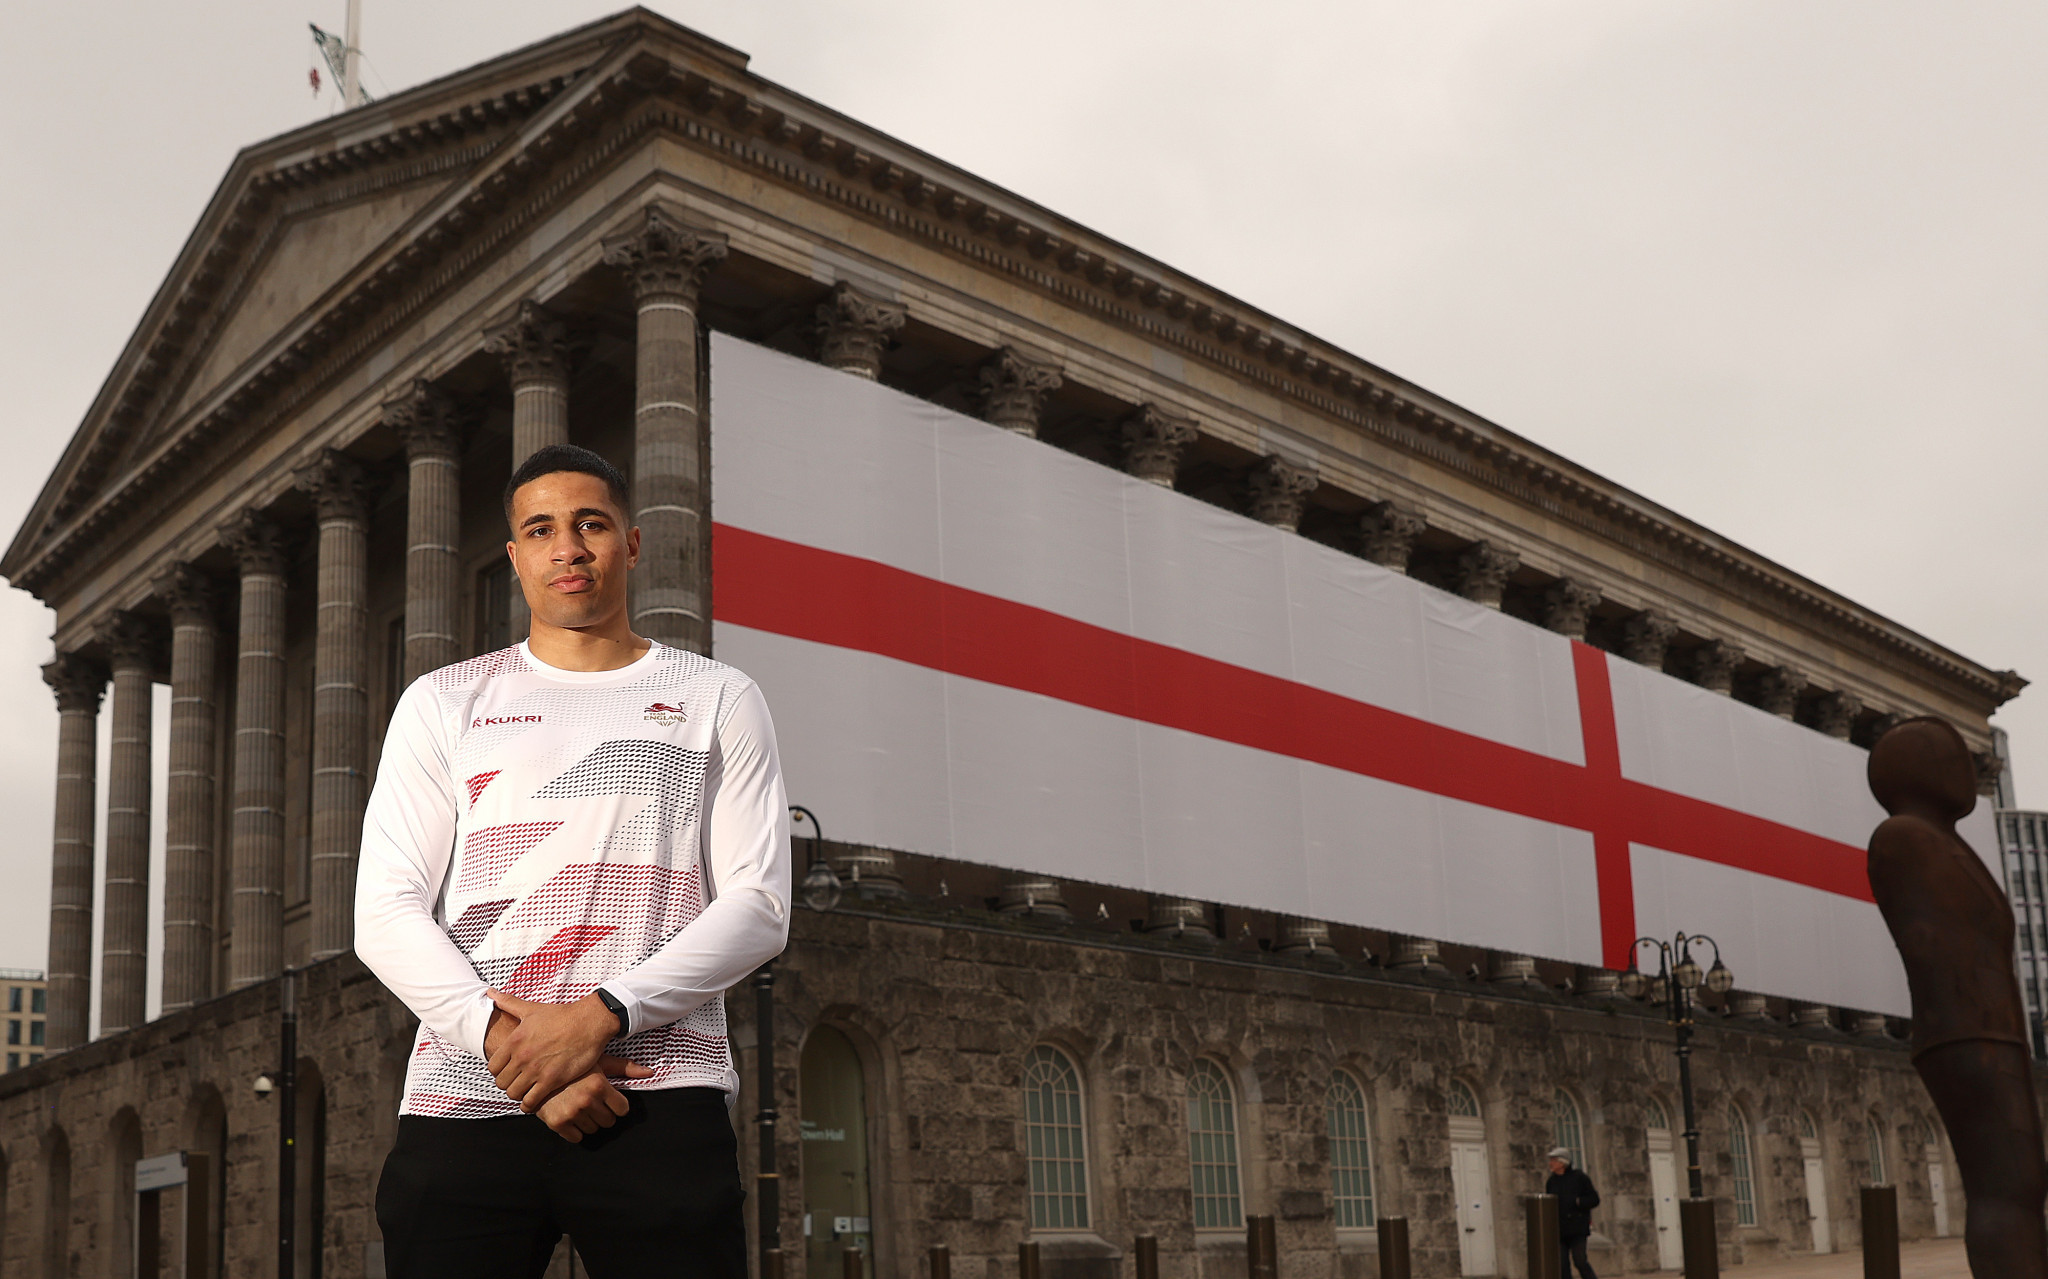 Delicious Orie leads England boxing team for Birmingham 2022